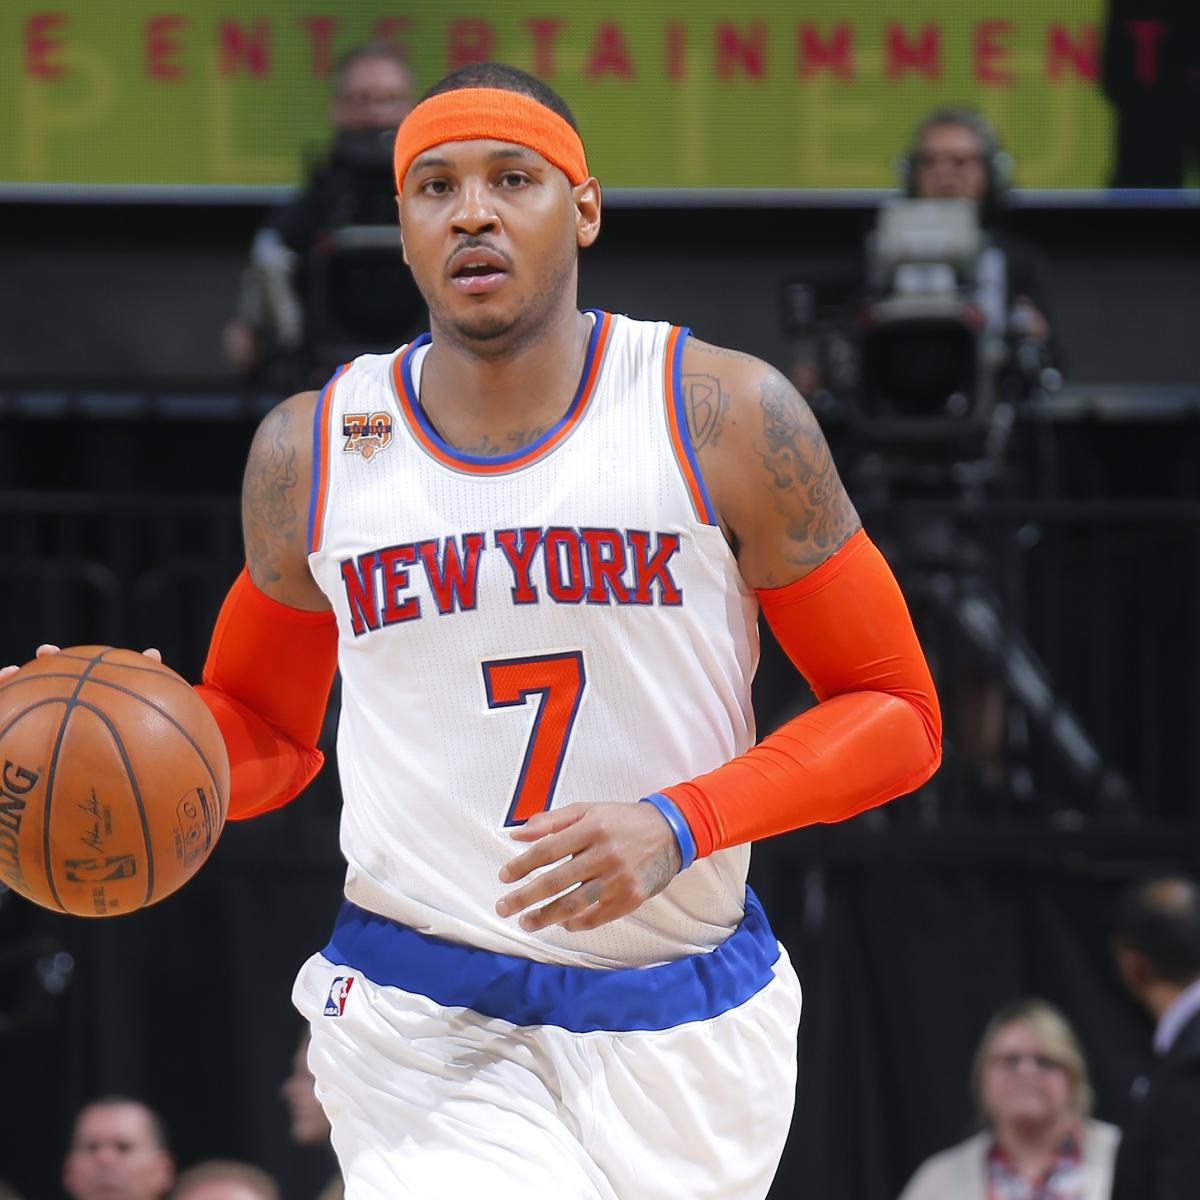 Carmelo Anthony 5th Active NBA Player with 23,000 Career Points